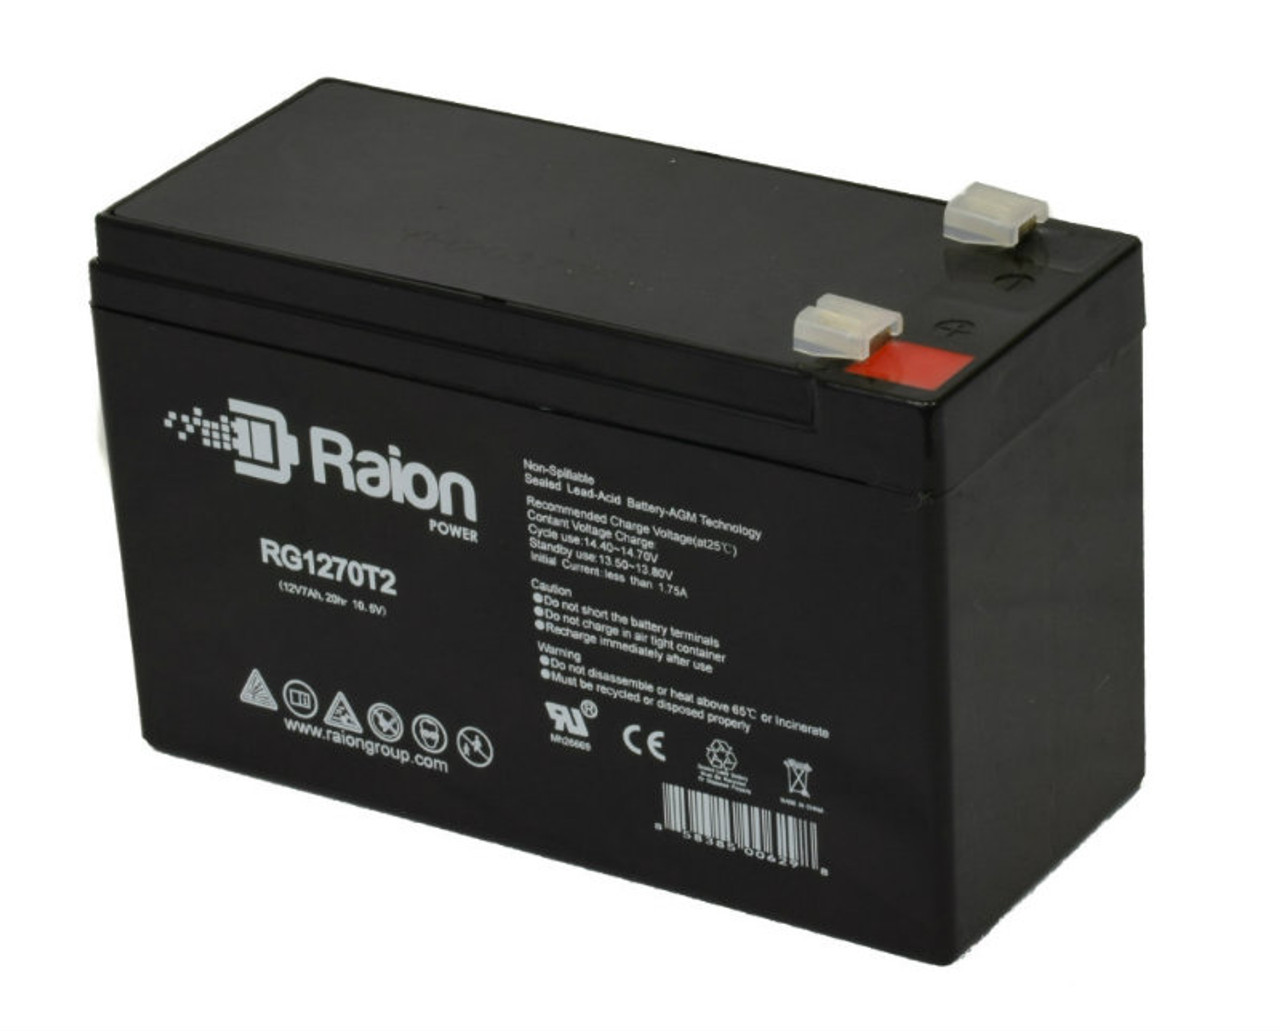 Raion Power RG1270T1 12V 7Ah Non-Spillable Replacement Battery for SEC 12-MP-7.2 F1